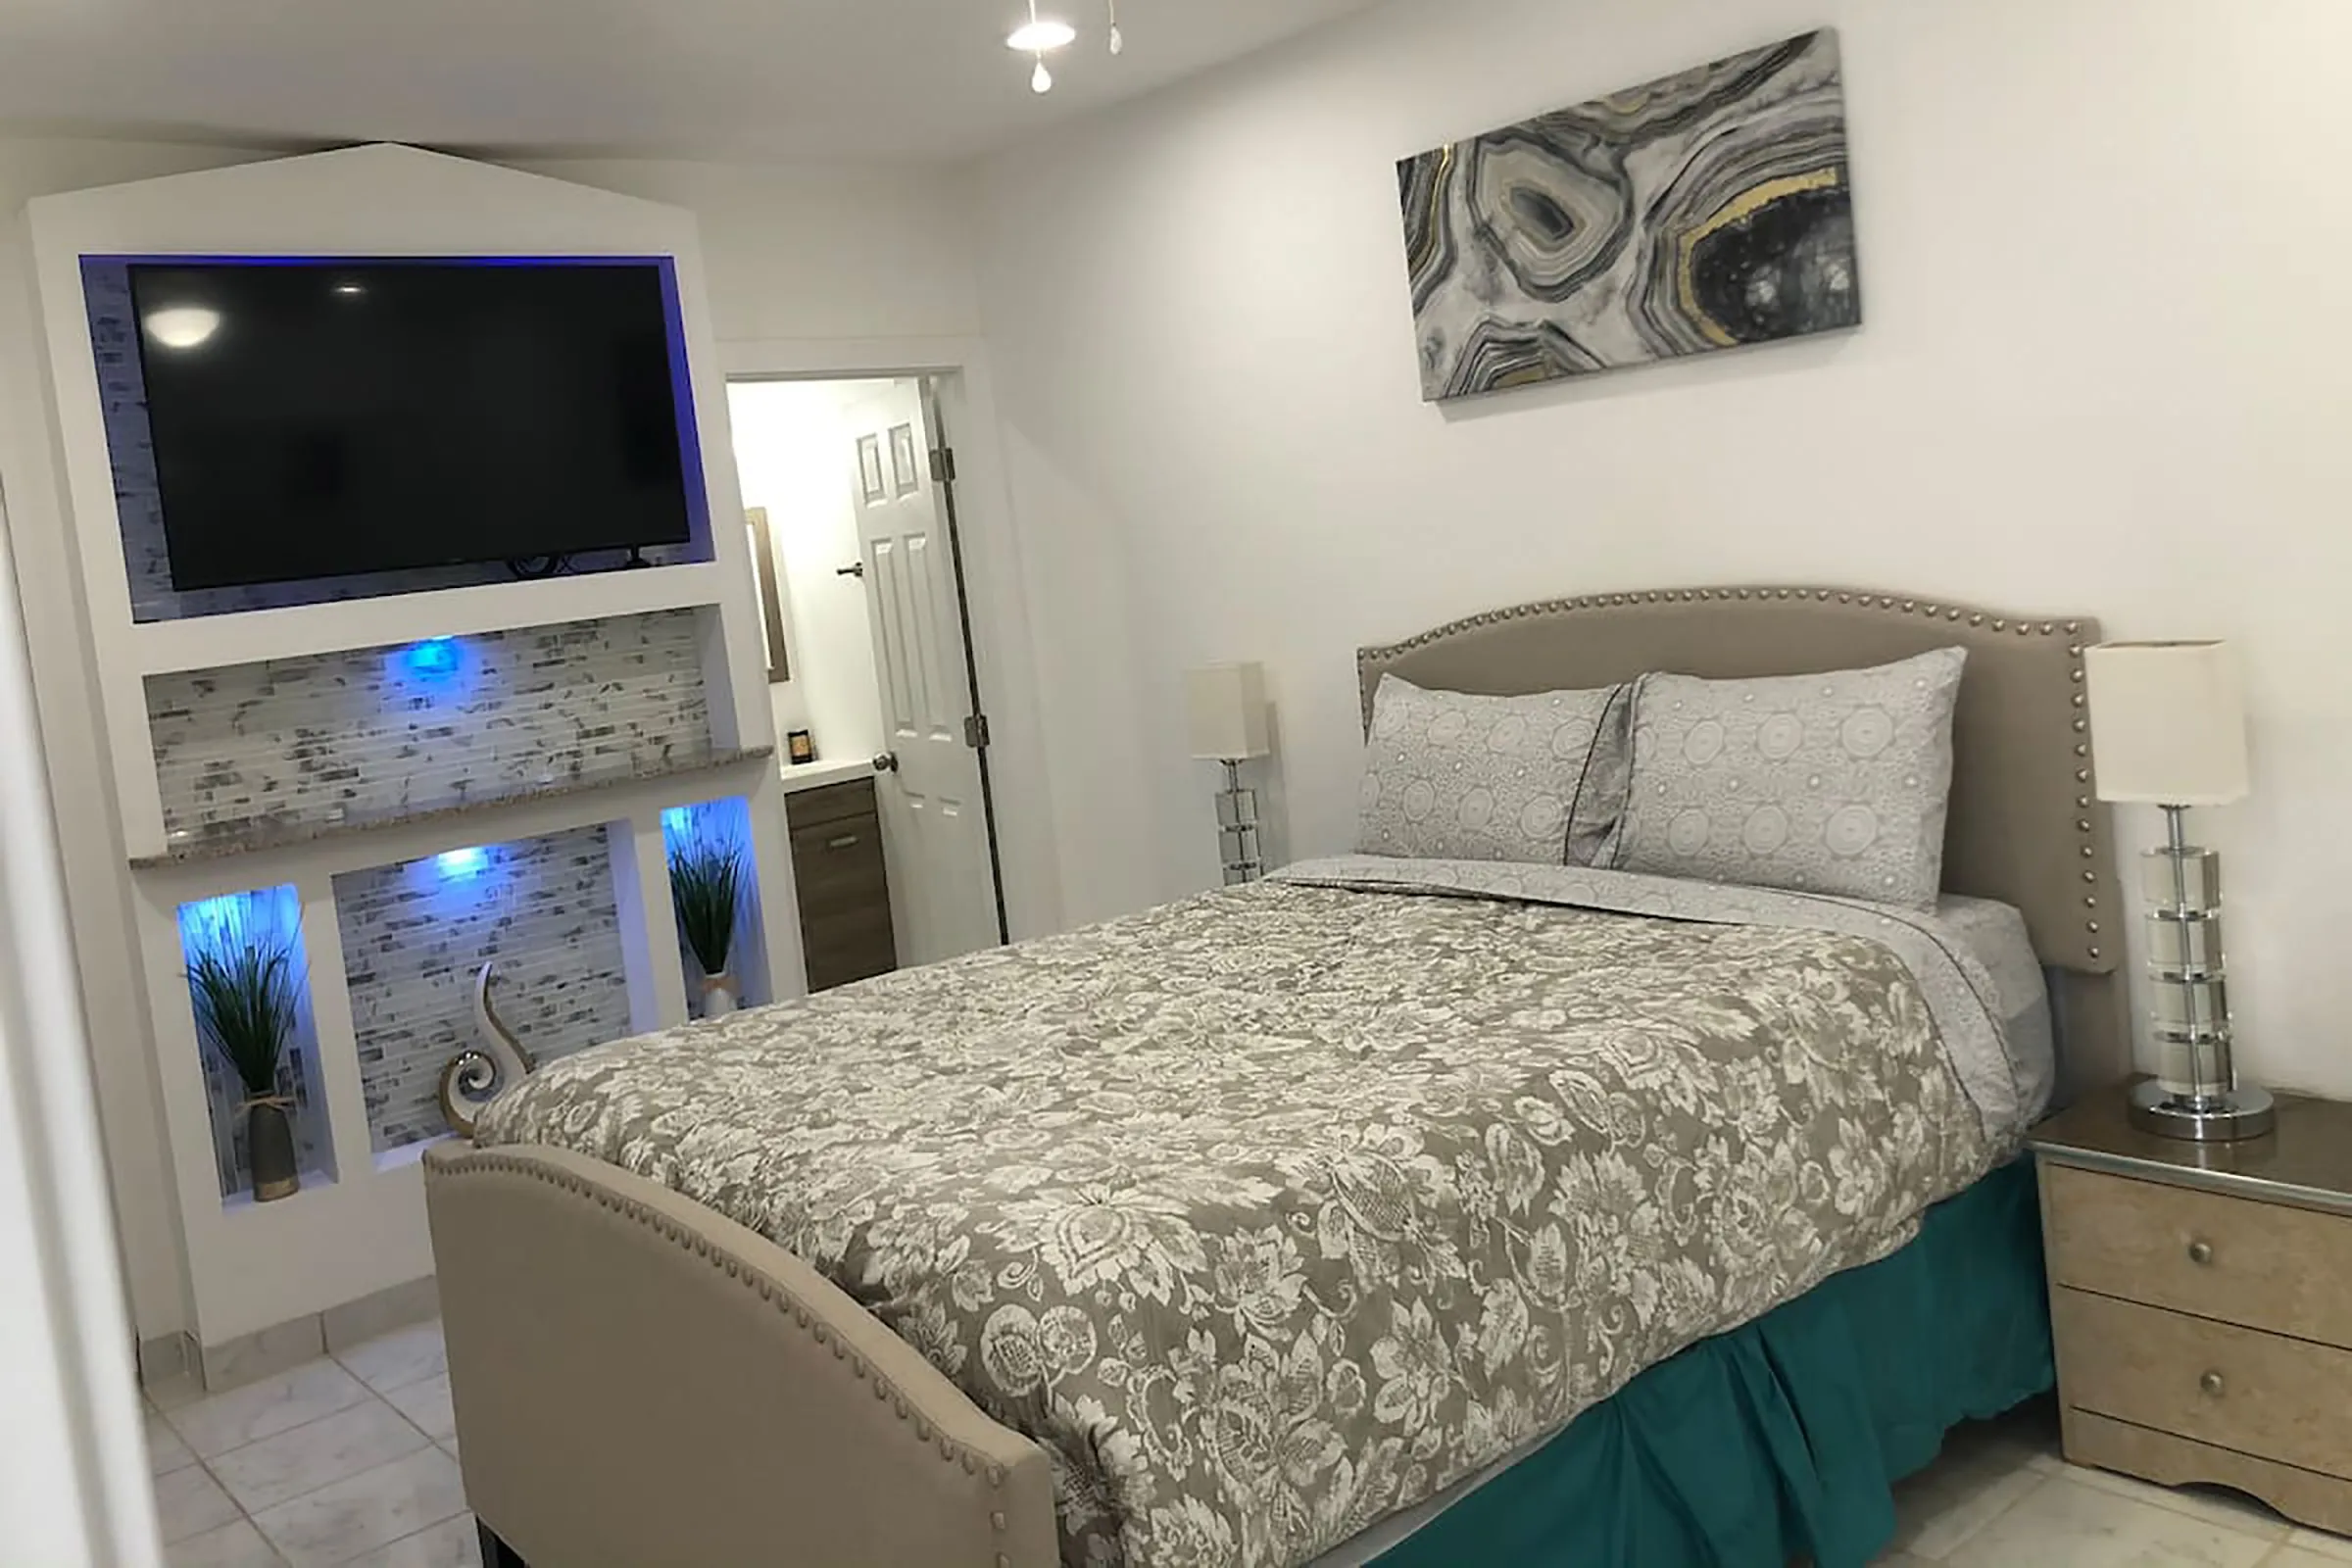 A bed with a floral comforter next to a mounted television with blue backlights. 